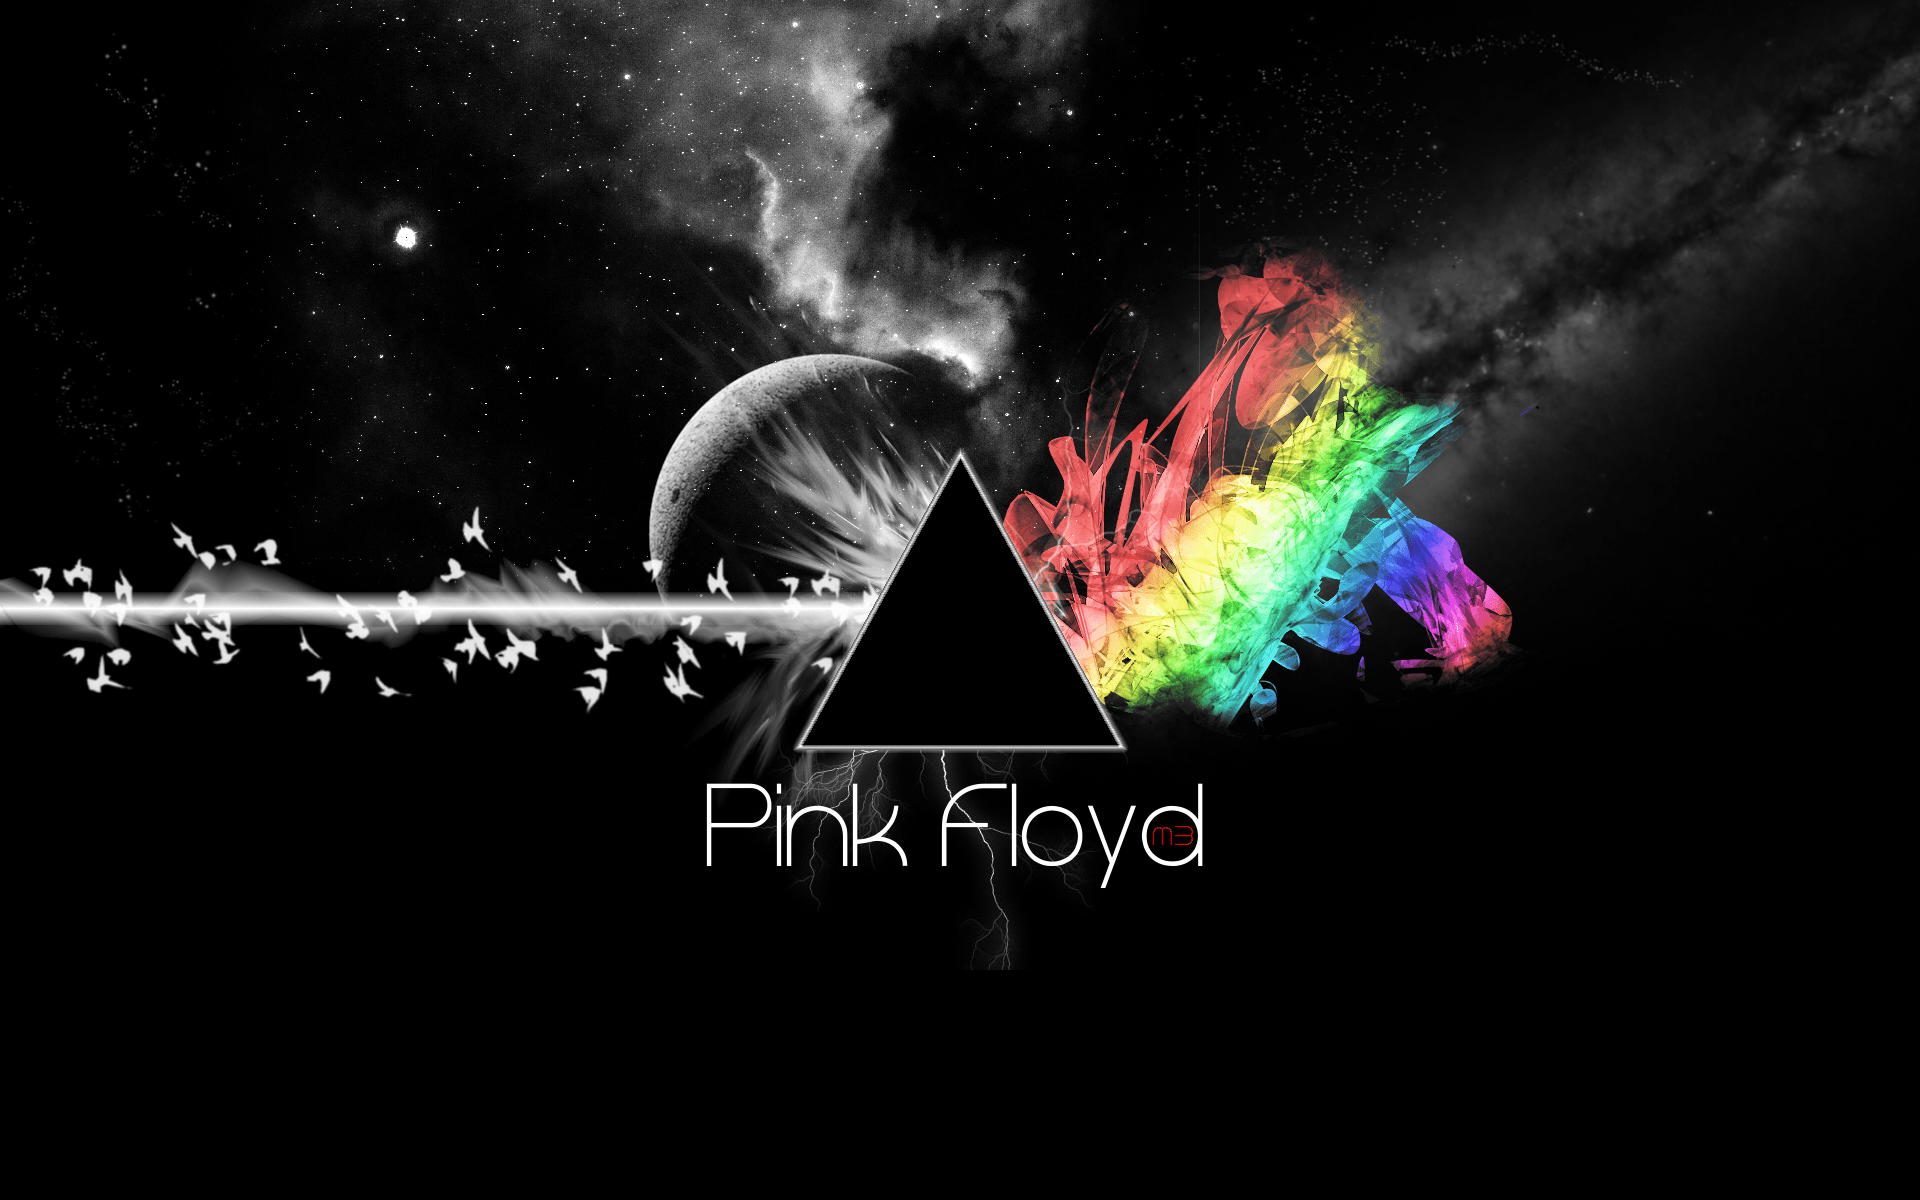 Review of: Pink Floyd